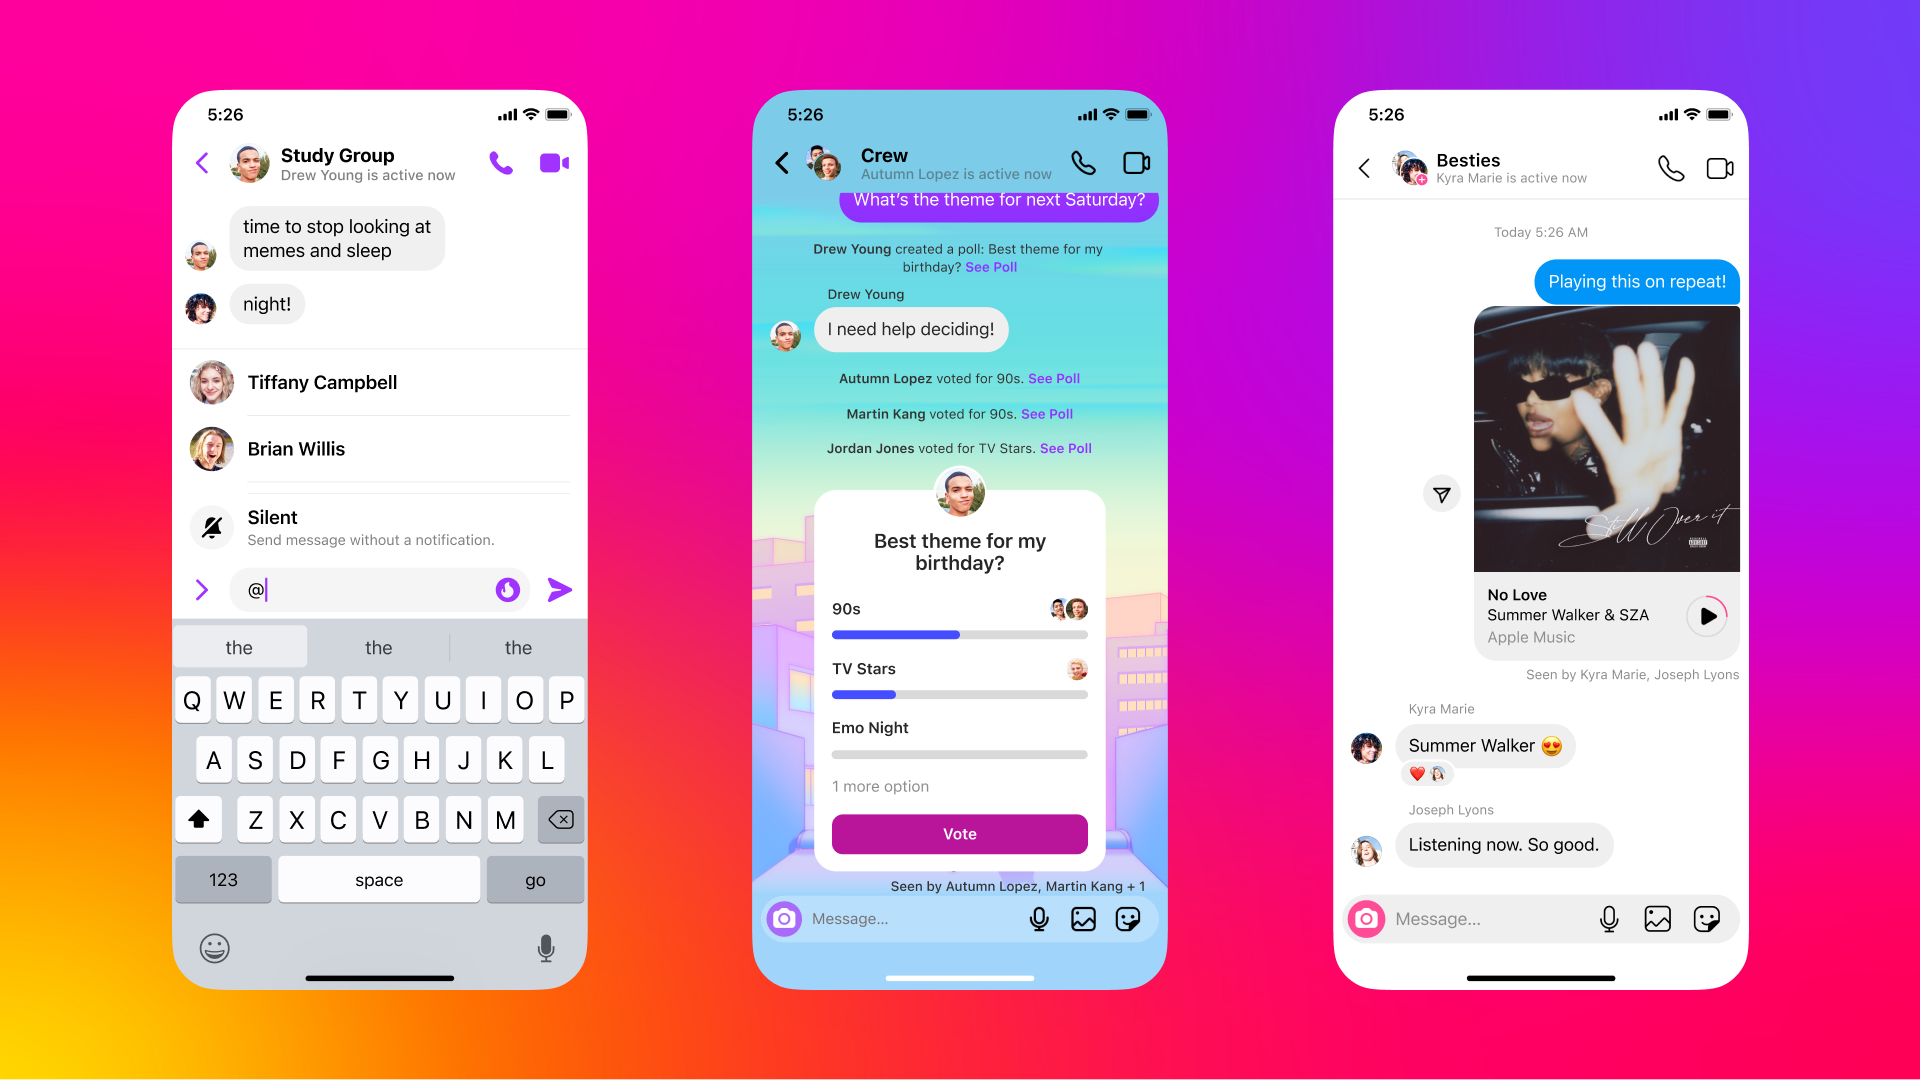 New Instagram Messaging Features 2022 — silent messages, group polls, song shares